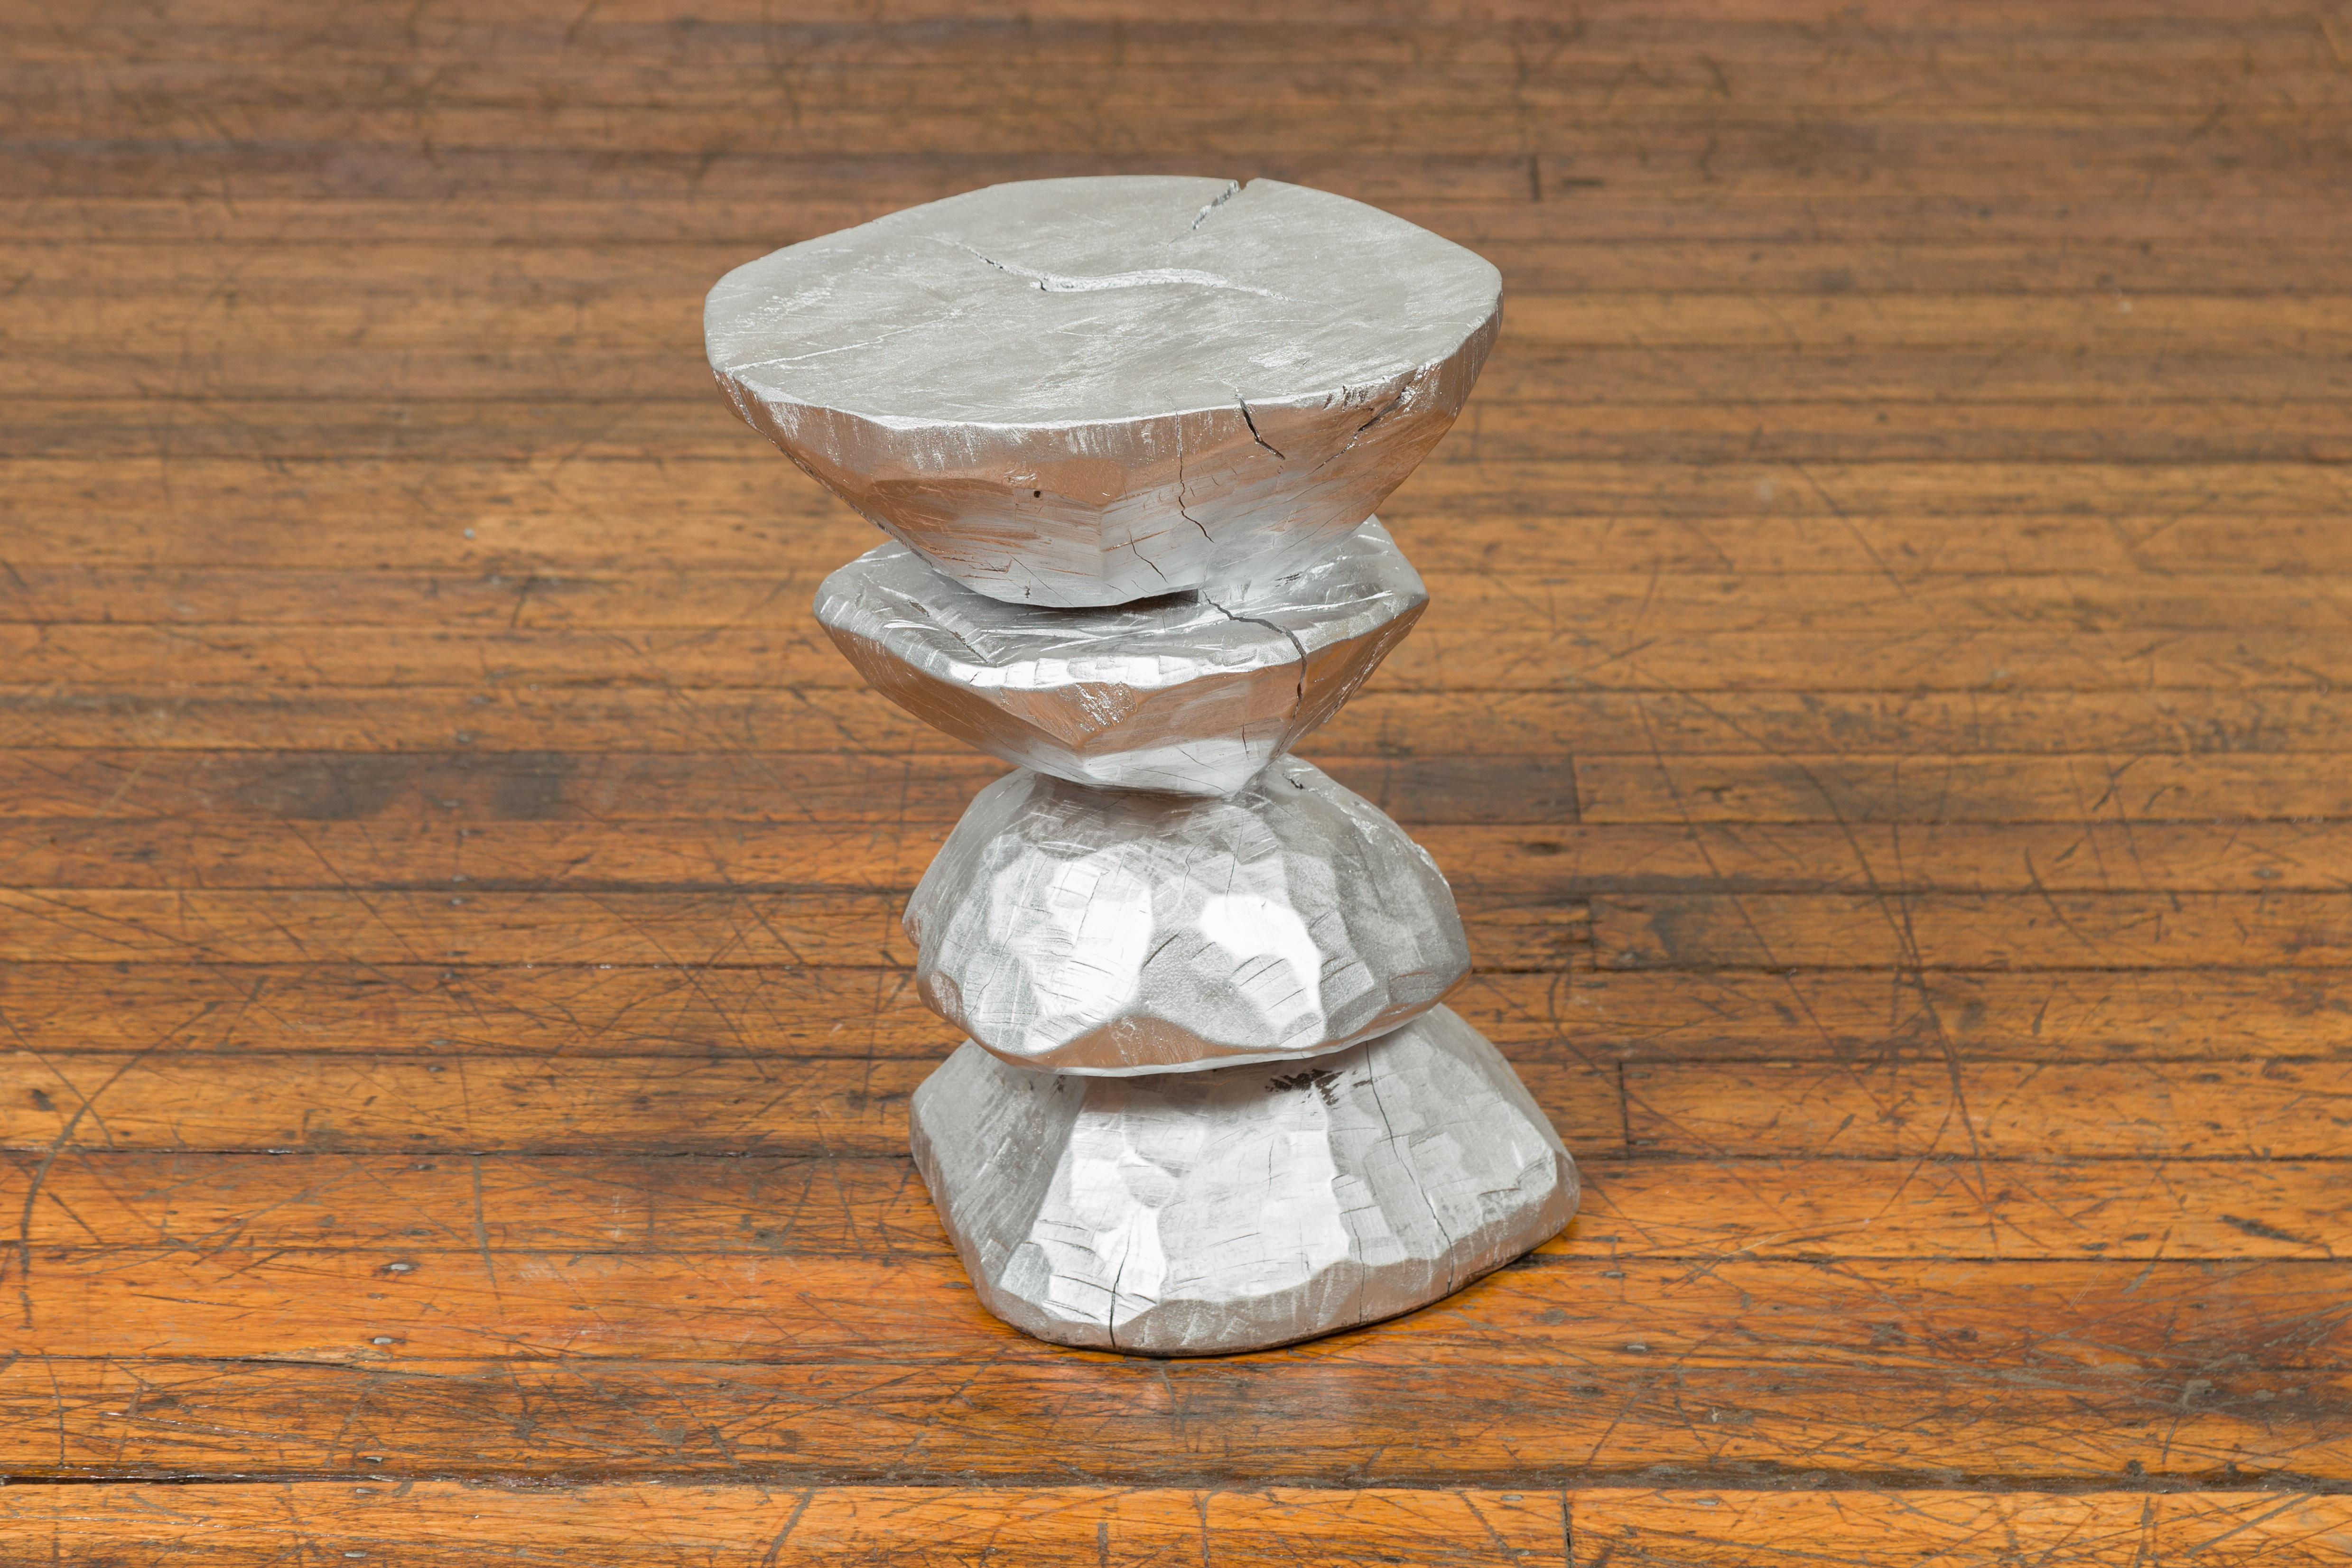 A contemporary Indonesian silver-colored wooden pedestal with tiered hourglass-inspired shape. Crafted in Indonesia, this pedestal will charm you with its shiny finish and interesting shape. Made of wood carved into irregular geometrical shapes,